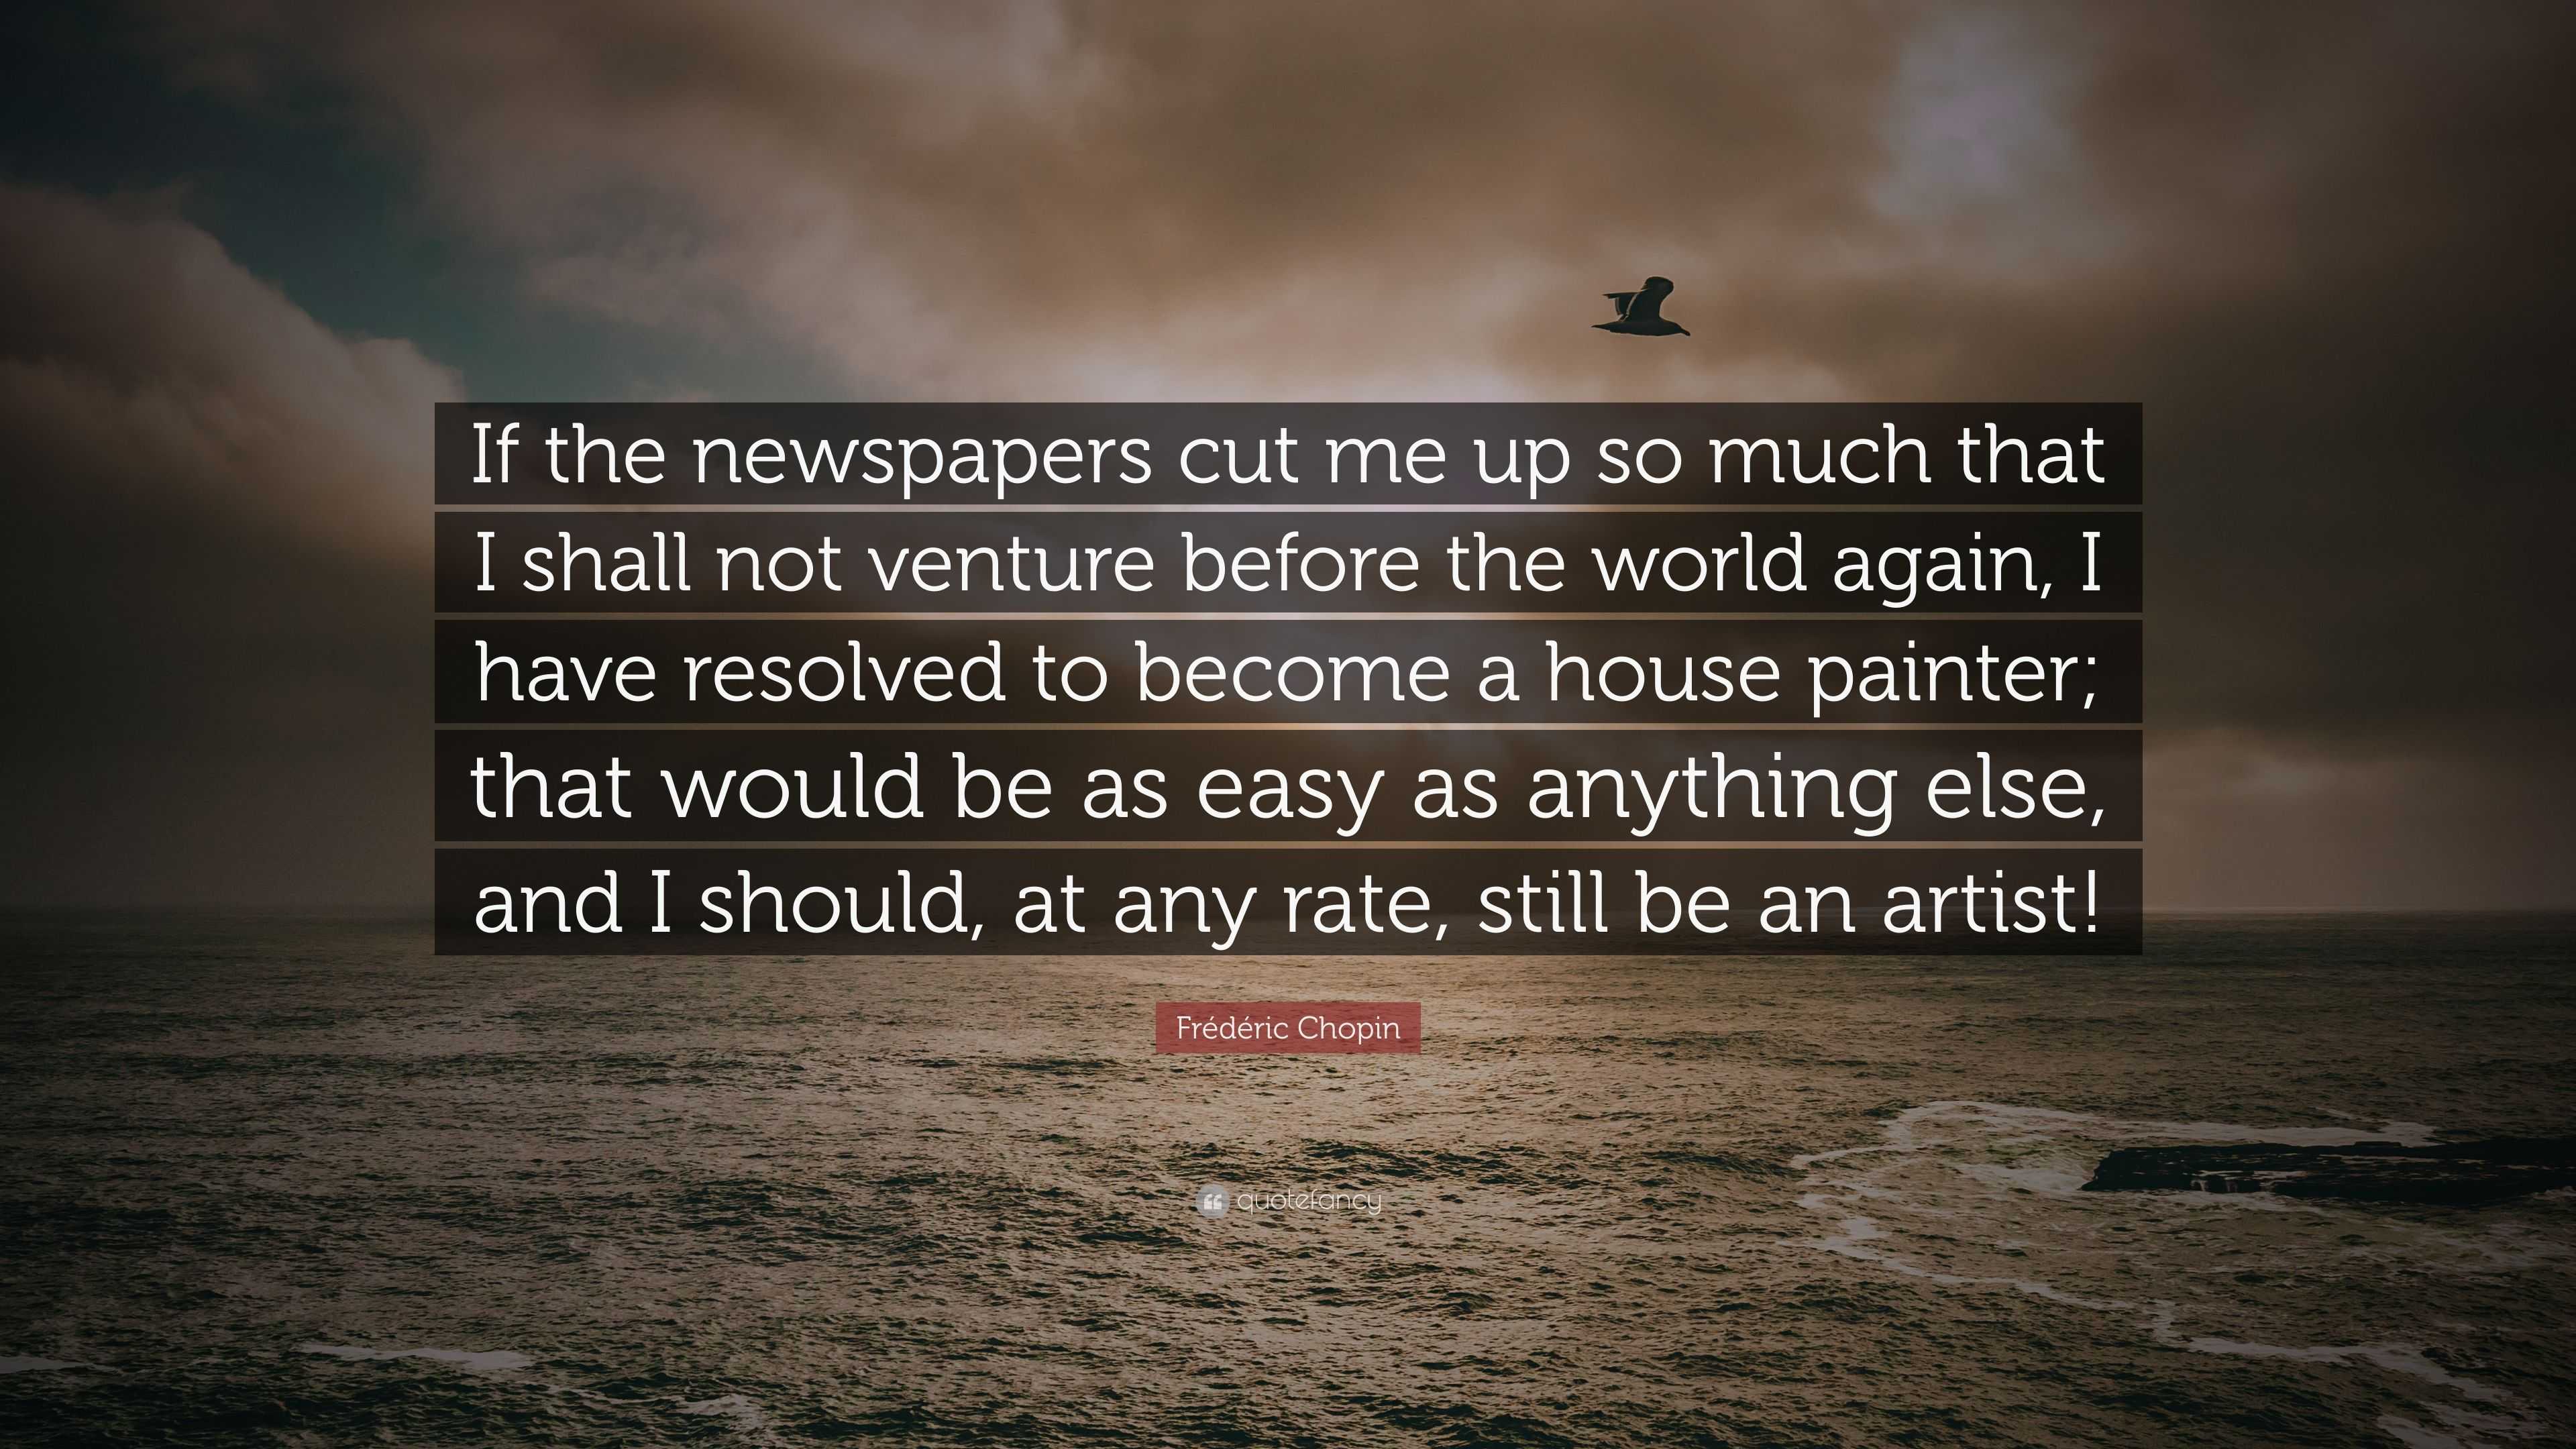 Frédéric Chopin Quote: “If the newspapers cut me up so much that I ...